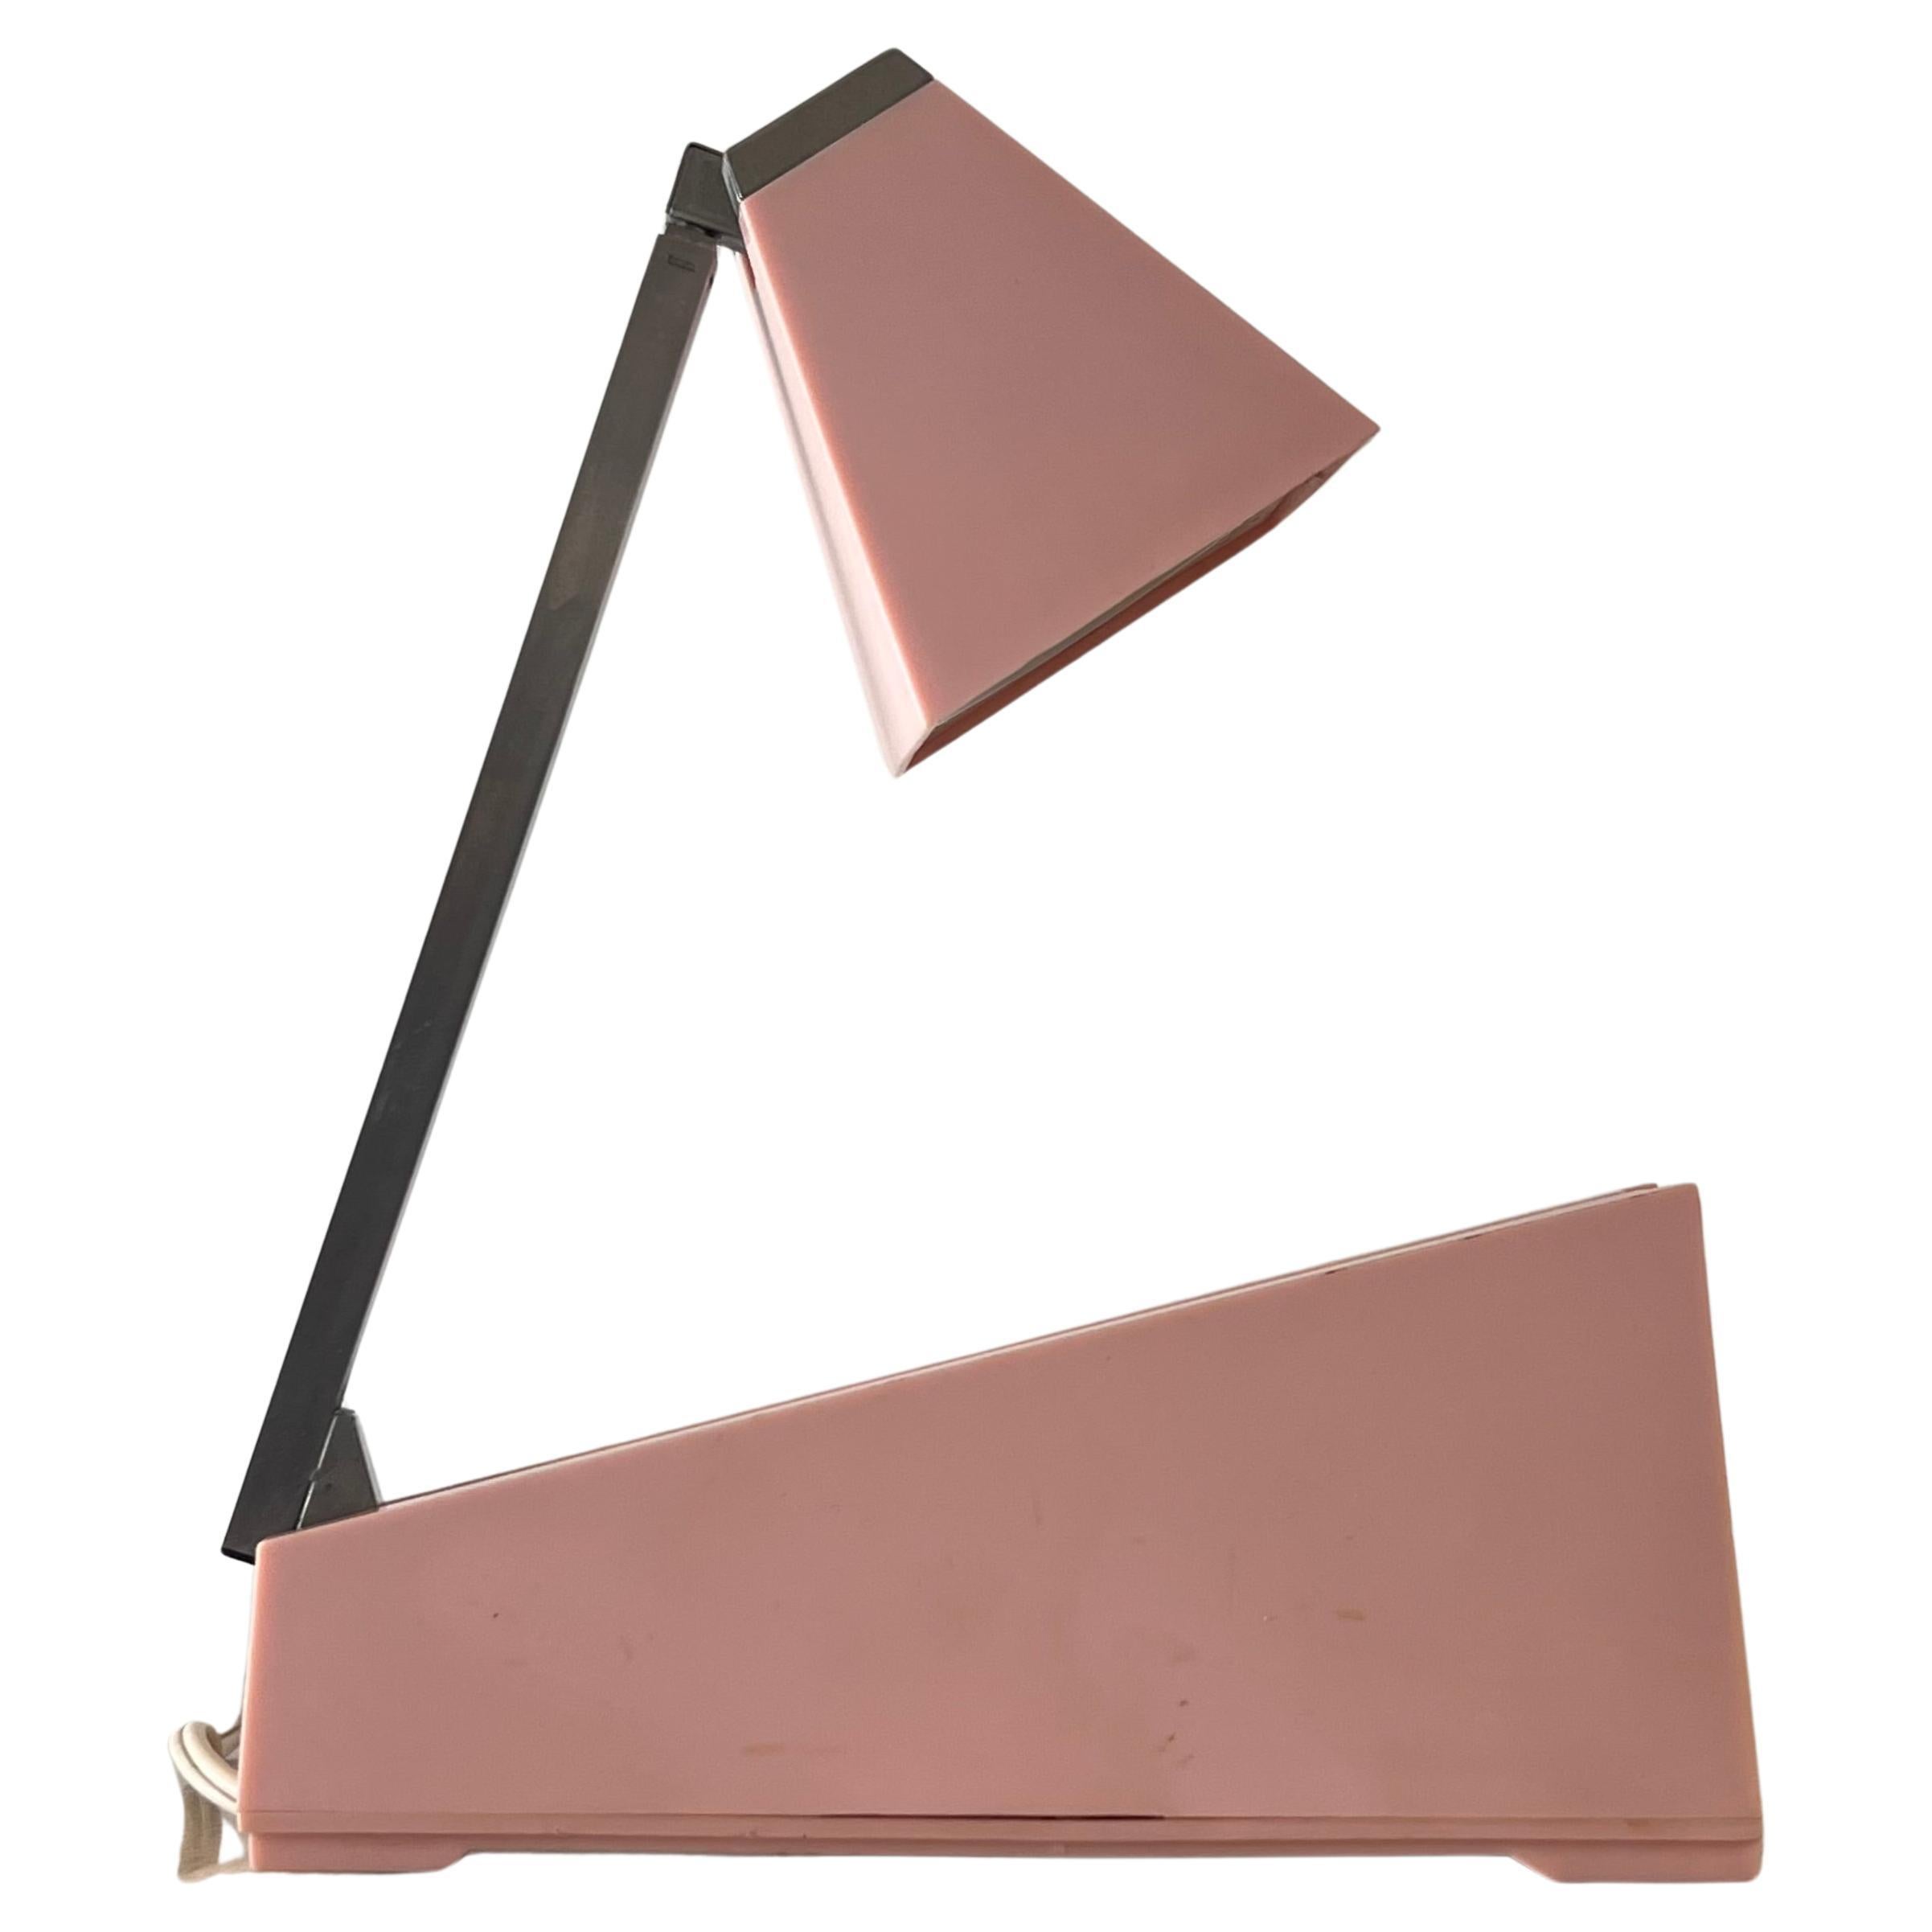 Vintage chrome and pink “Lampette” task lamp by Koch, 1964